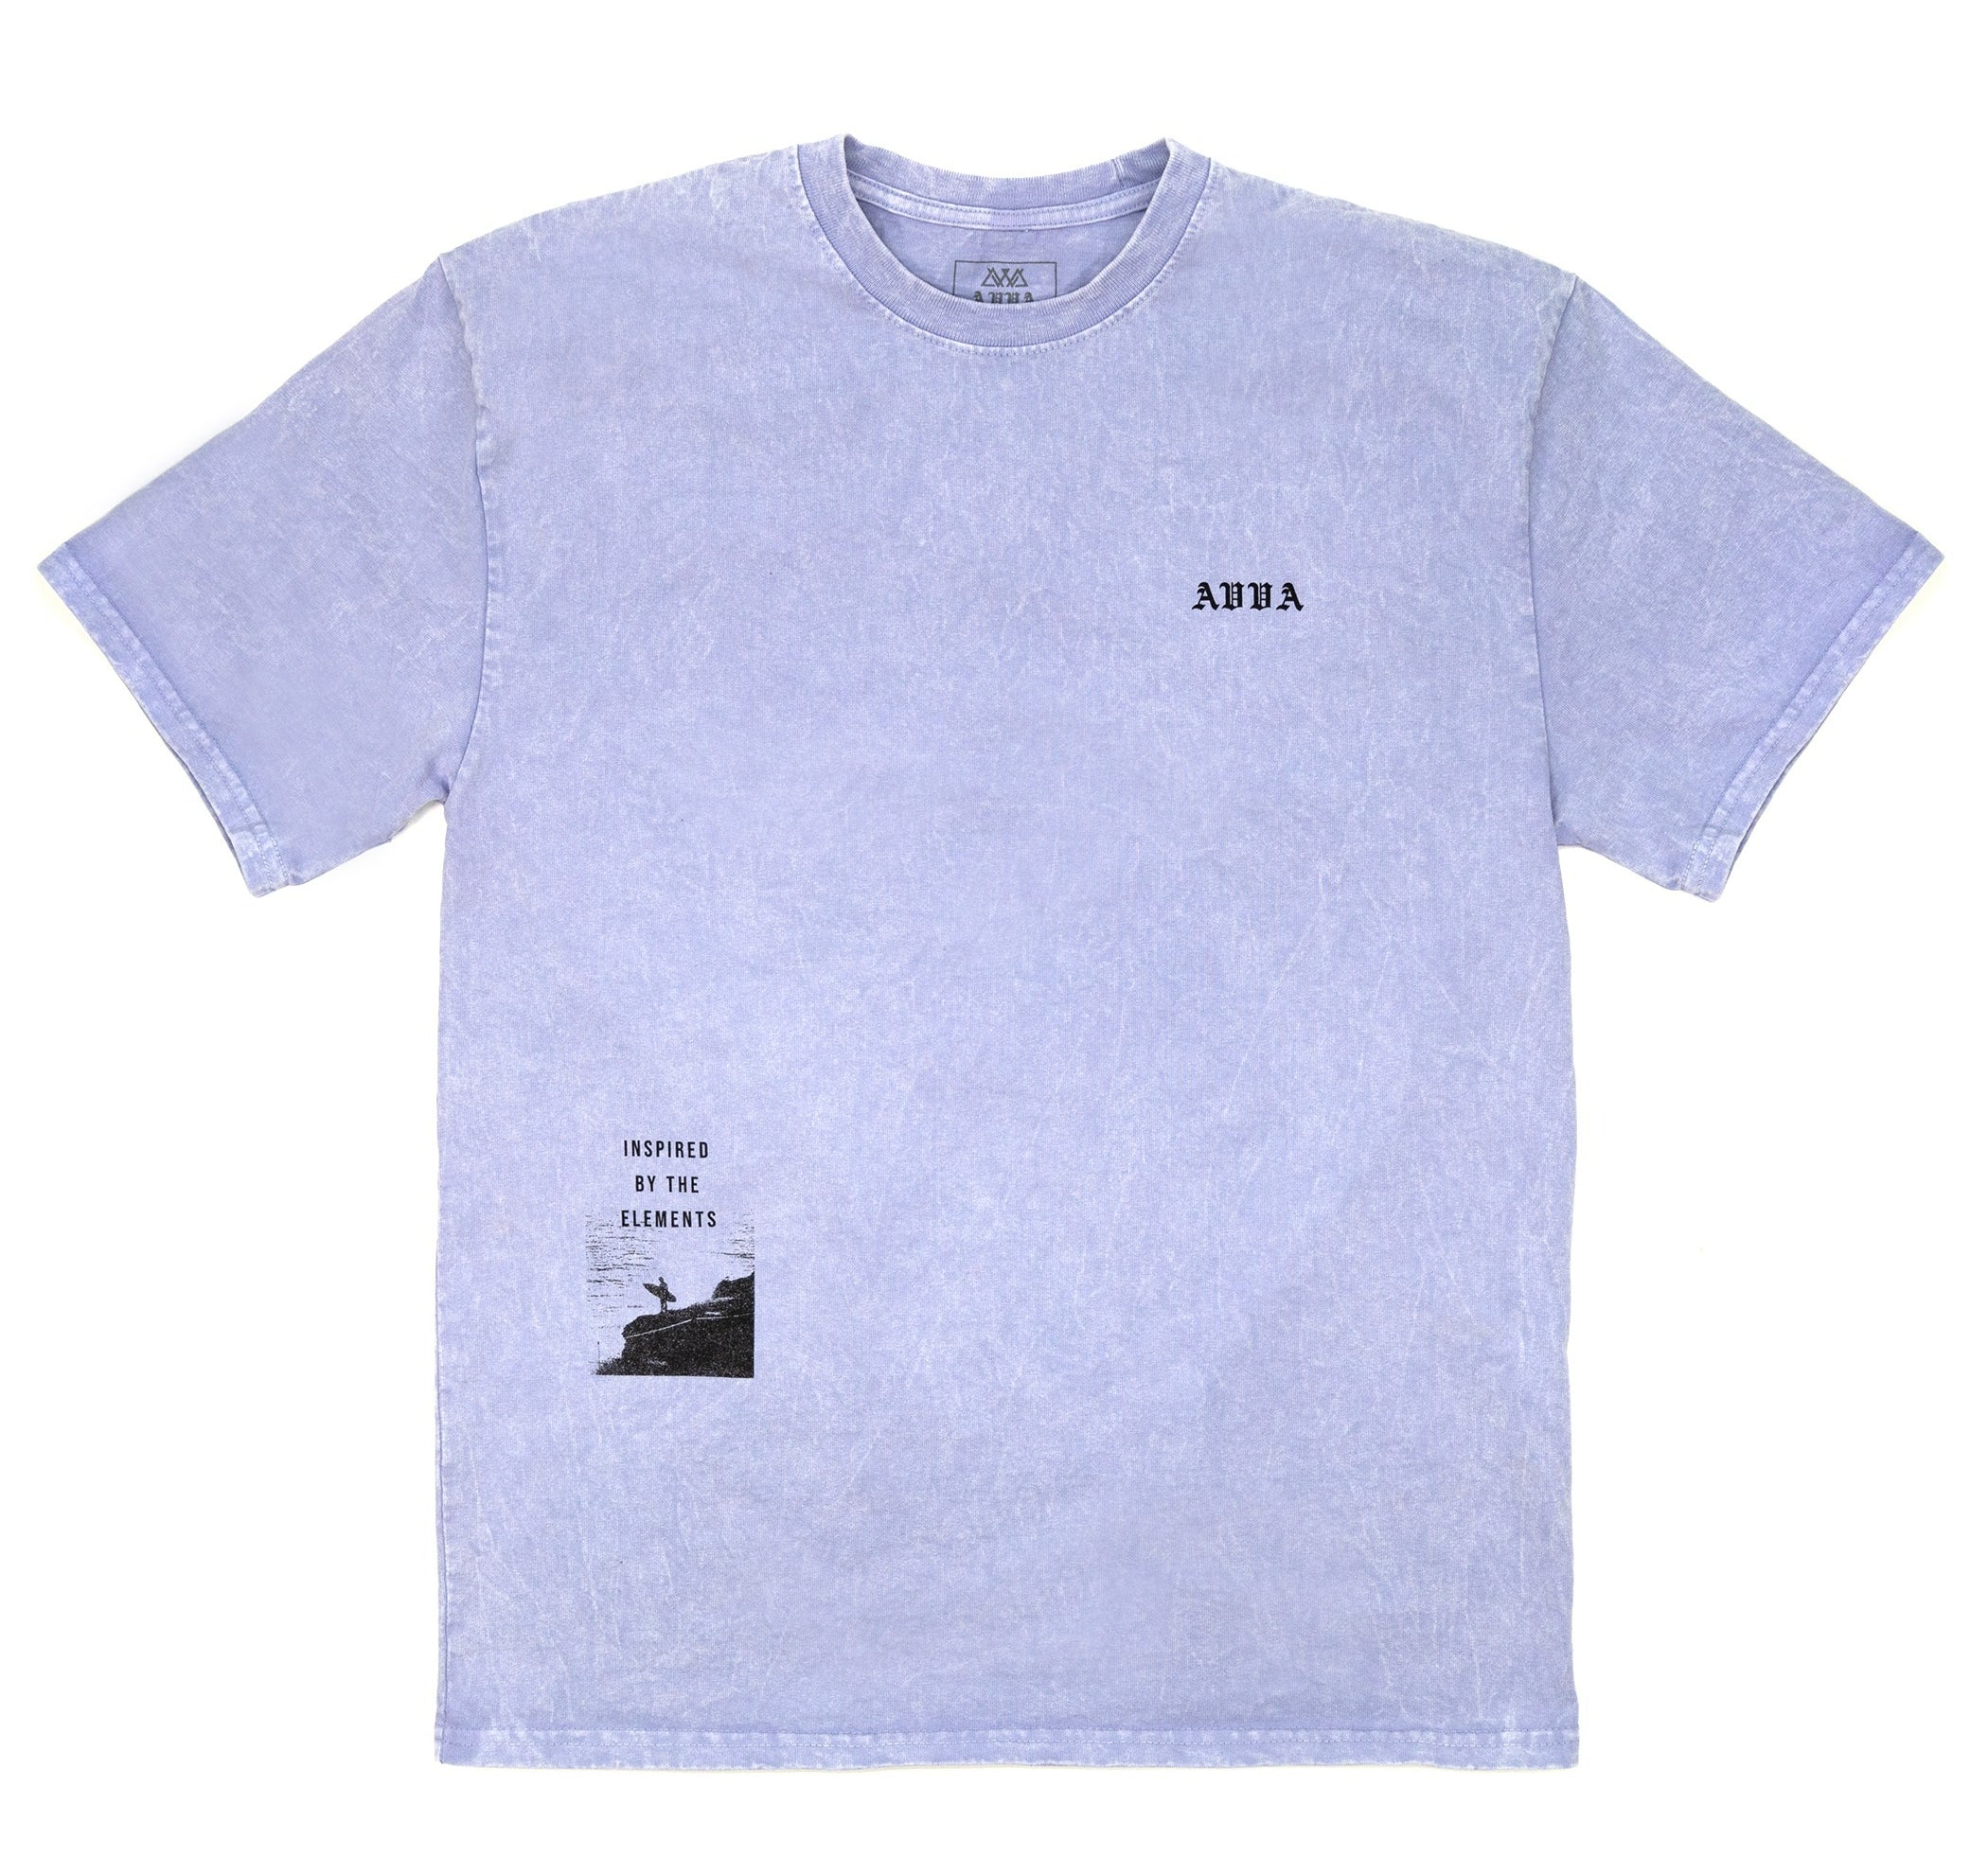 FRONT VIEW OF PURPLE ISLAND HAZE TEE.  SMALL AVVA LOGO IN TOP RIGHT CORNER WITH A INSPIRED BY THE ELEMENTS GRAPHIC OF SURFER HOLDING SURFBOARD LOOKING AT THE WATER IN BOTTOM LEFT CORNER.